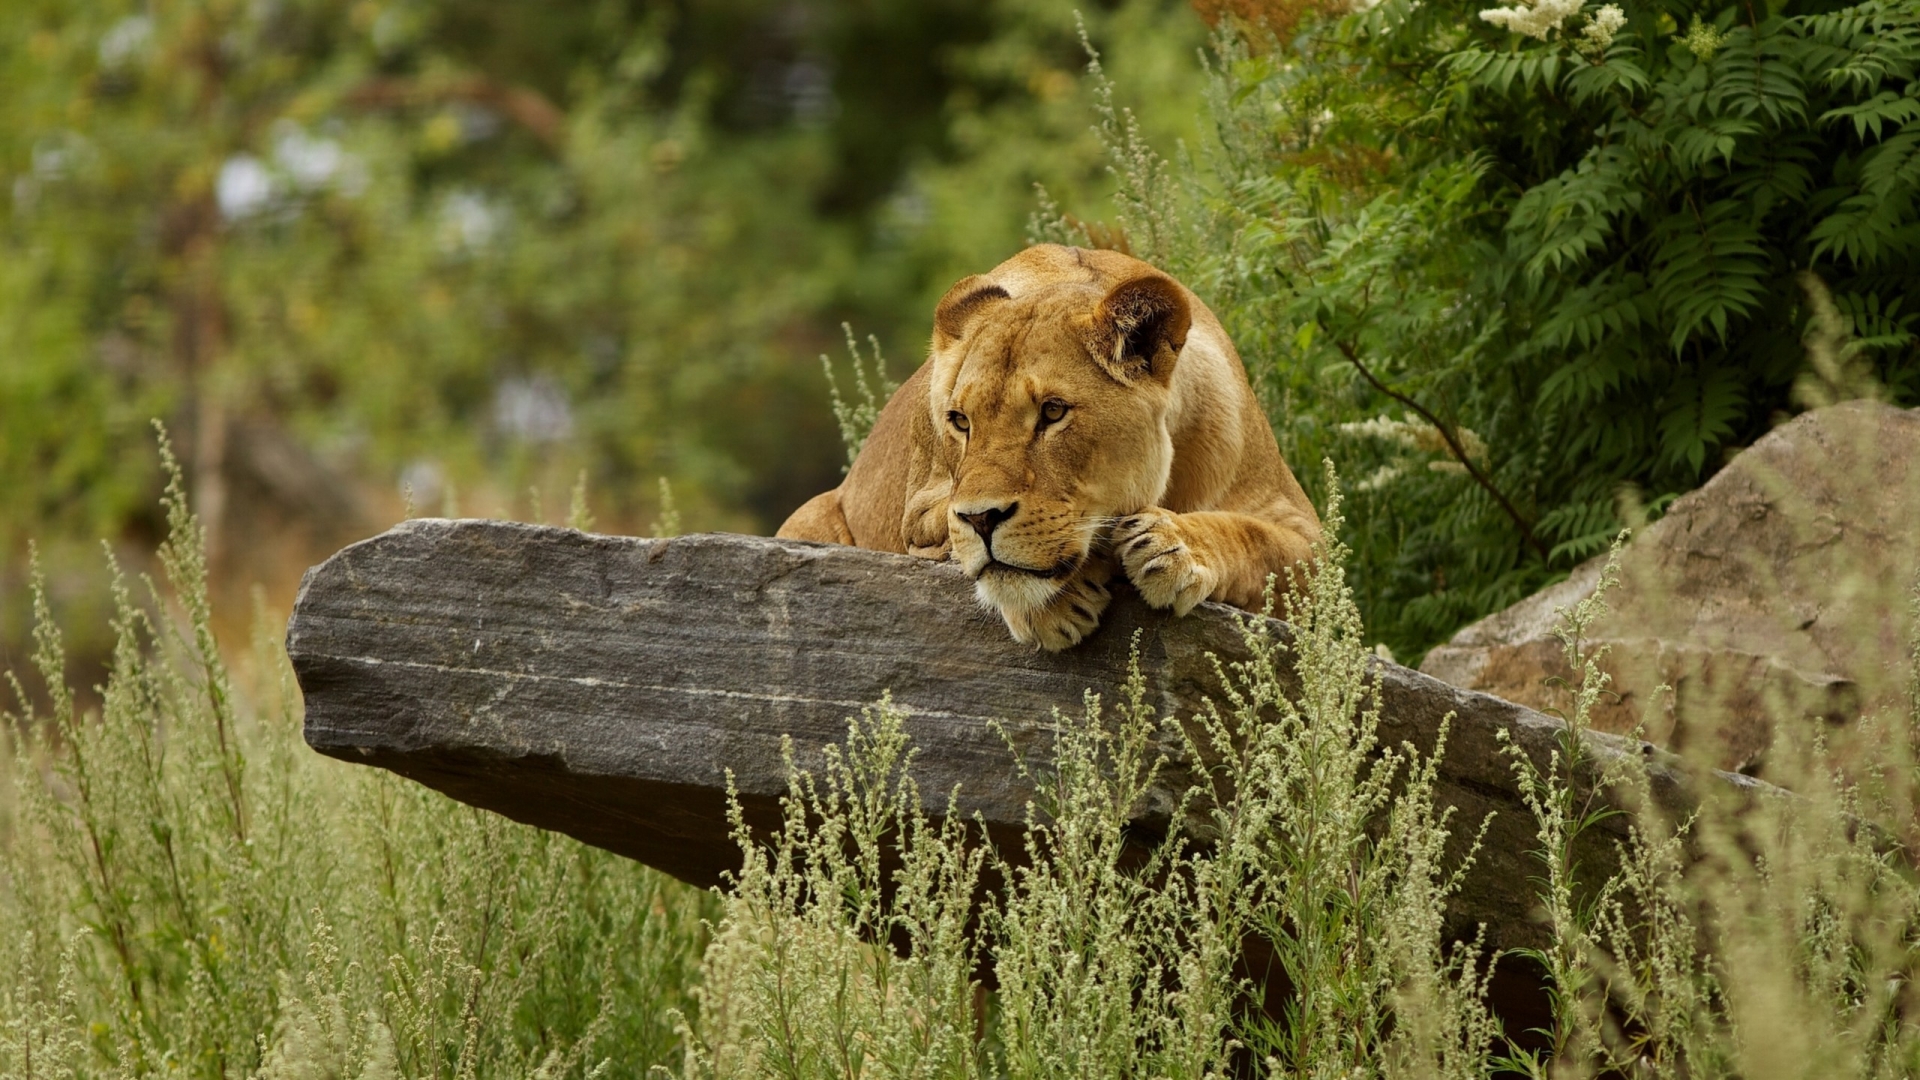 Cute Lion Relaxing for 1920 x 1080 HDTV 1080p resolution